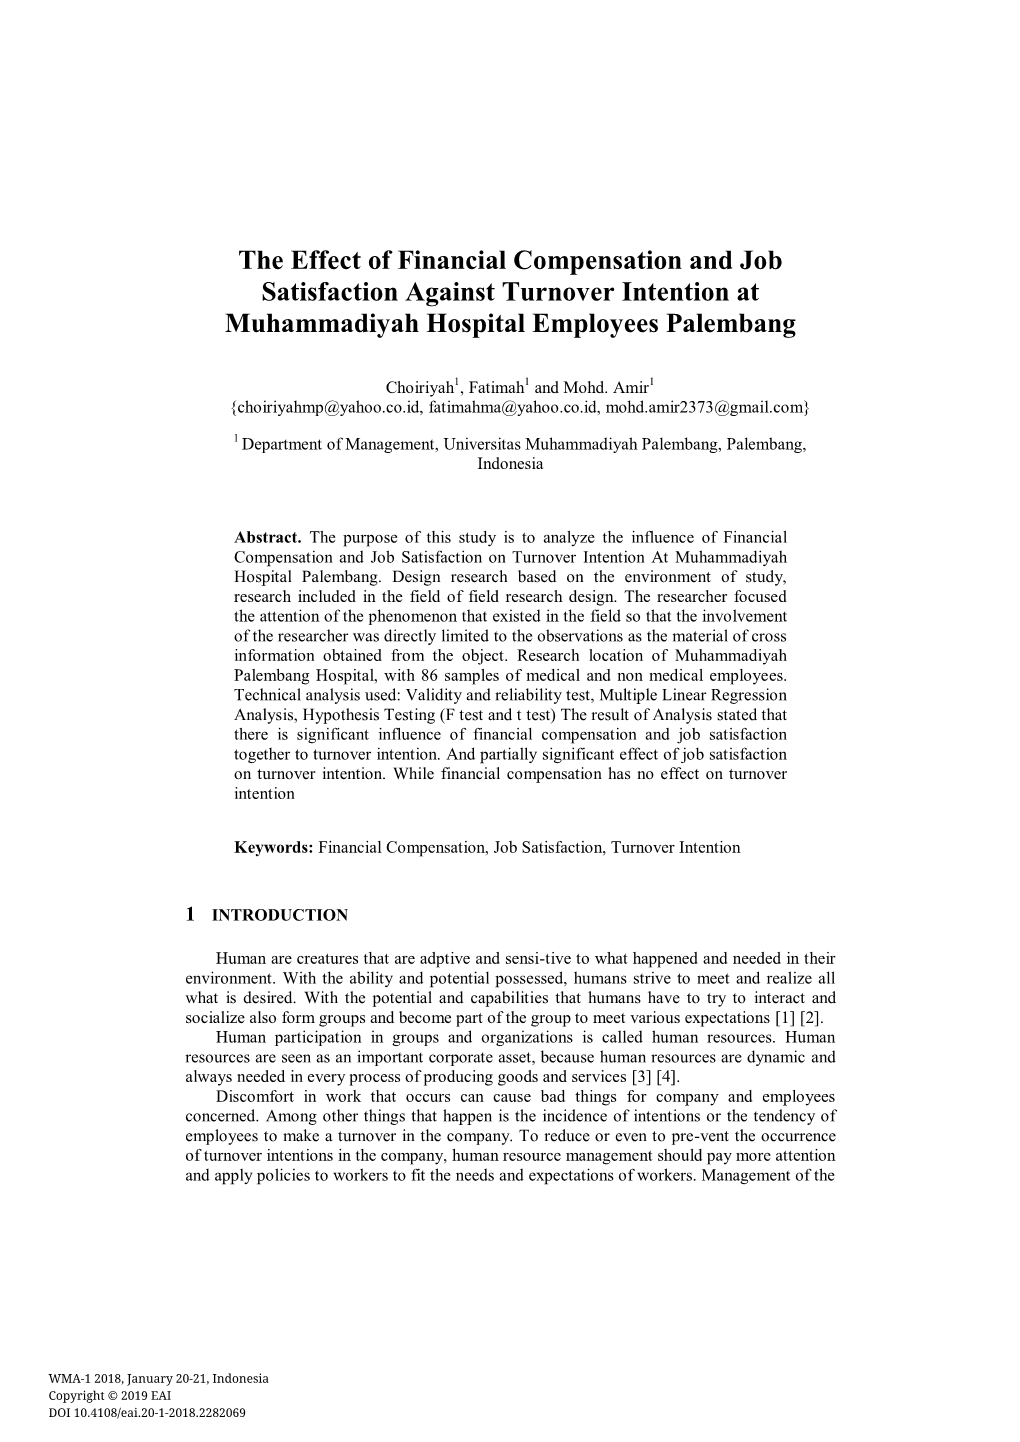 The Effect of Financial Compensation and Job Satisfaction Against Turnover Intention at Muhammadiyah Hospital Employees Palembang